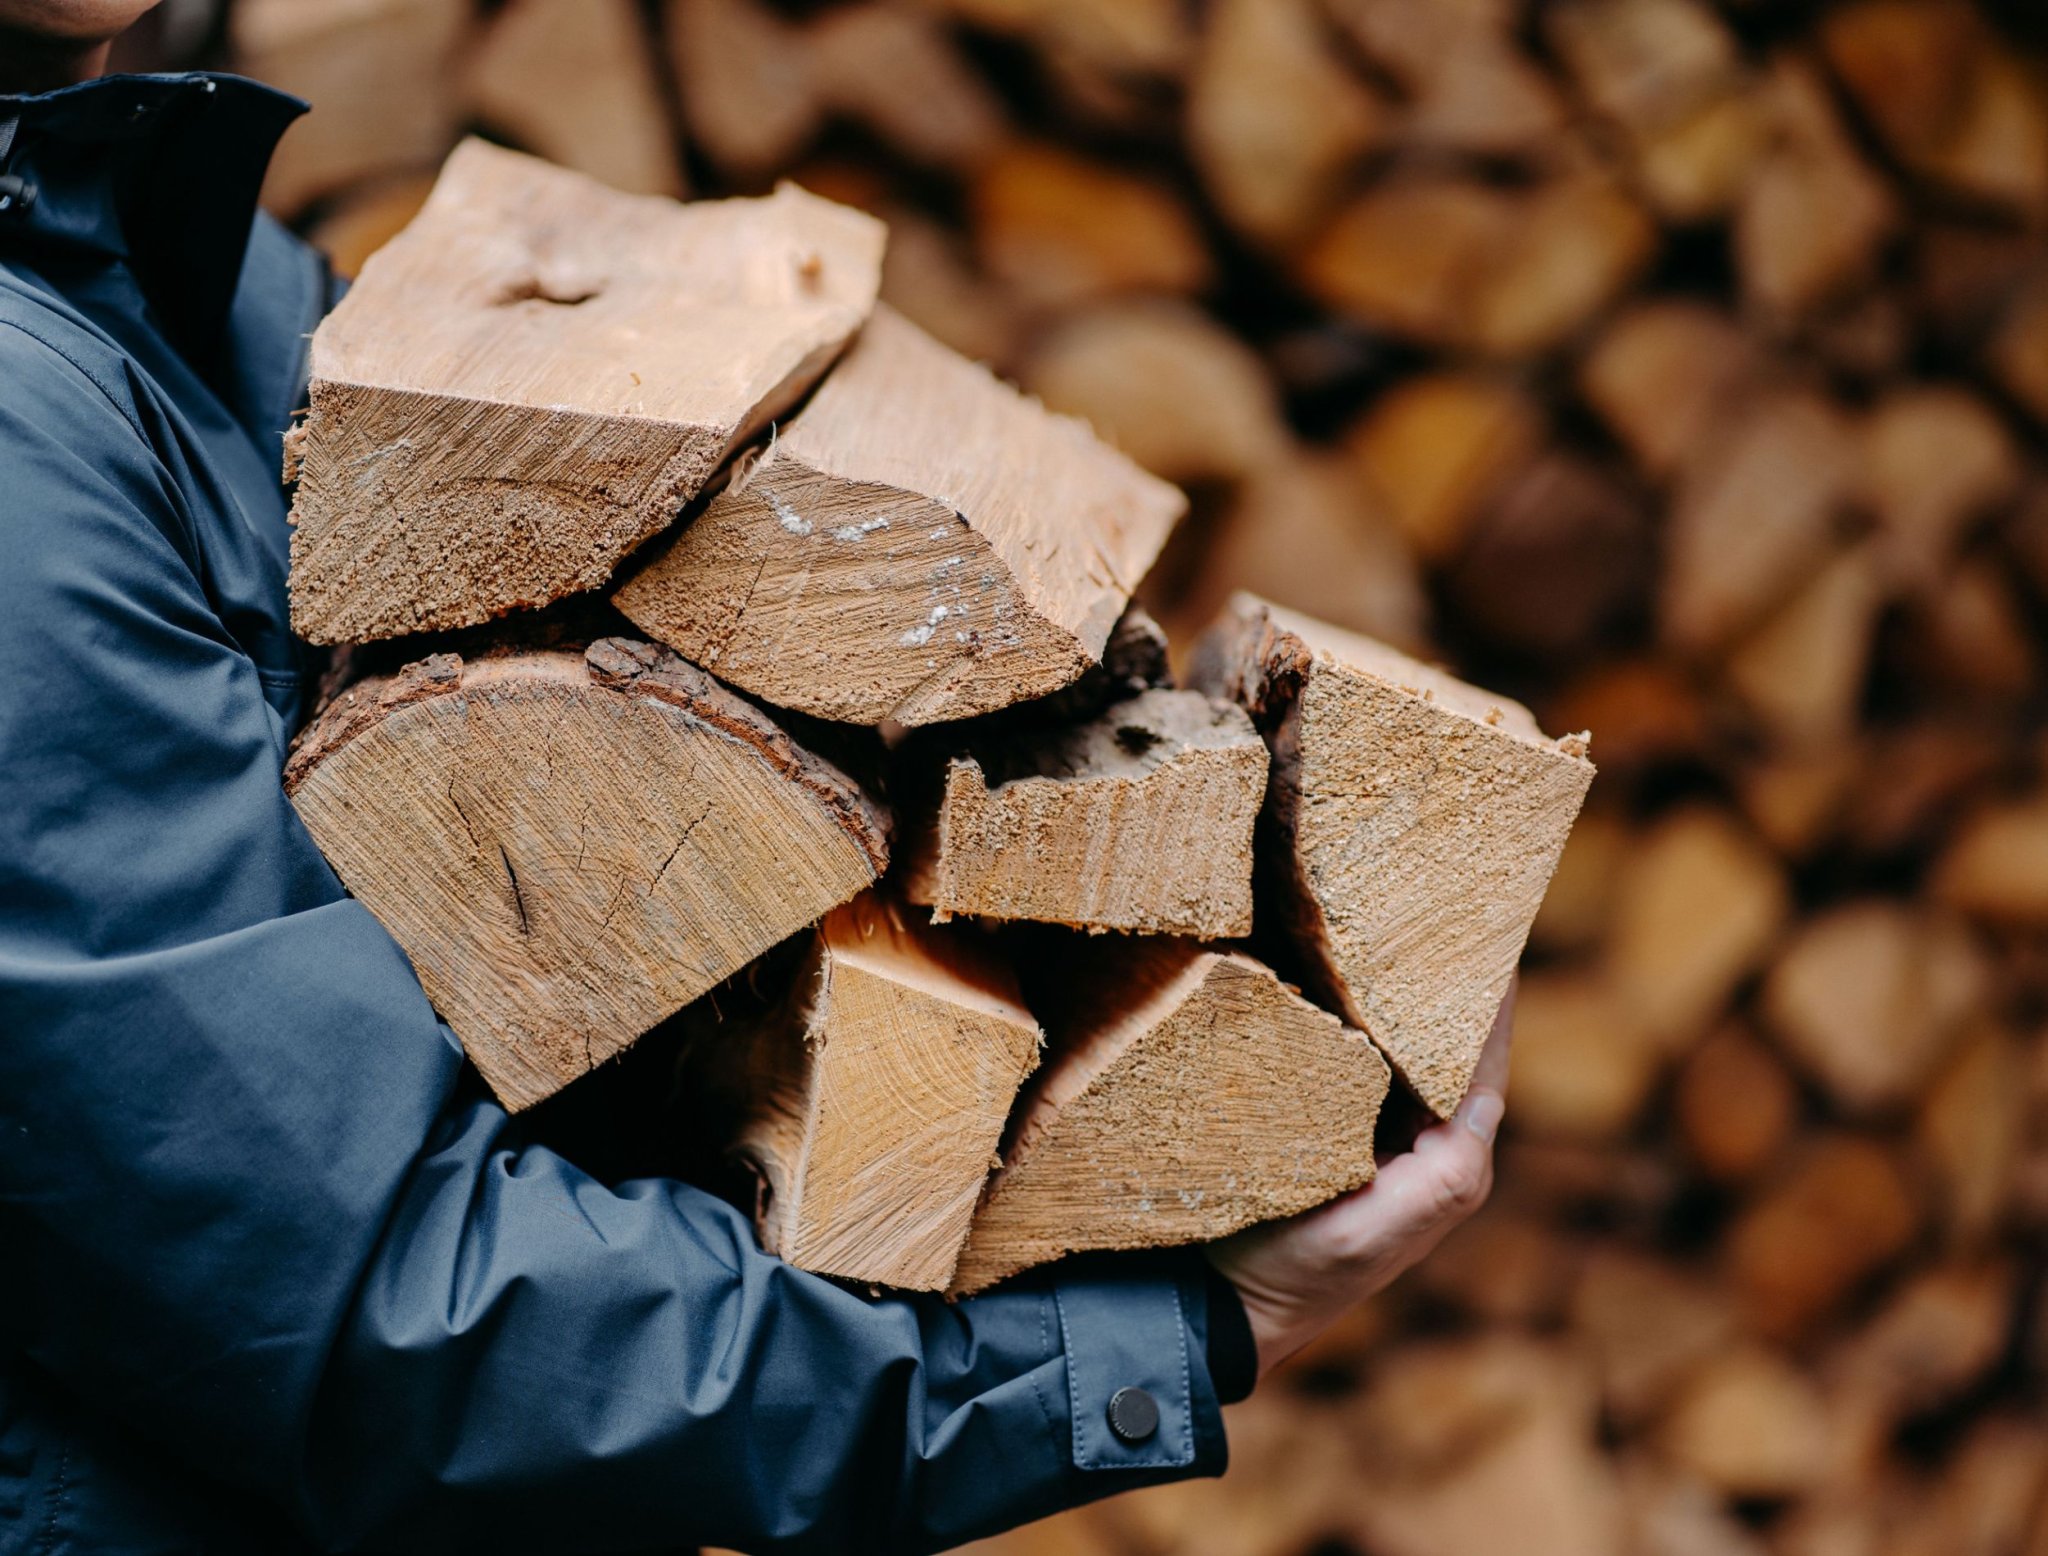 Hardwood vs Softwood: Which Is Better Firewood?